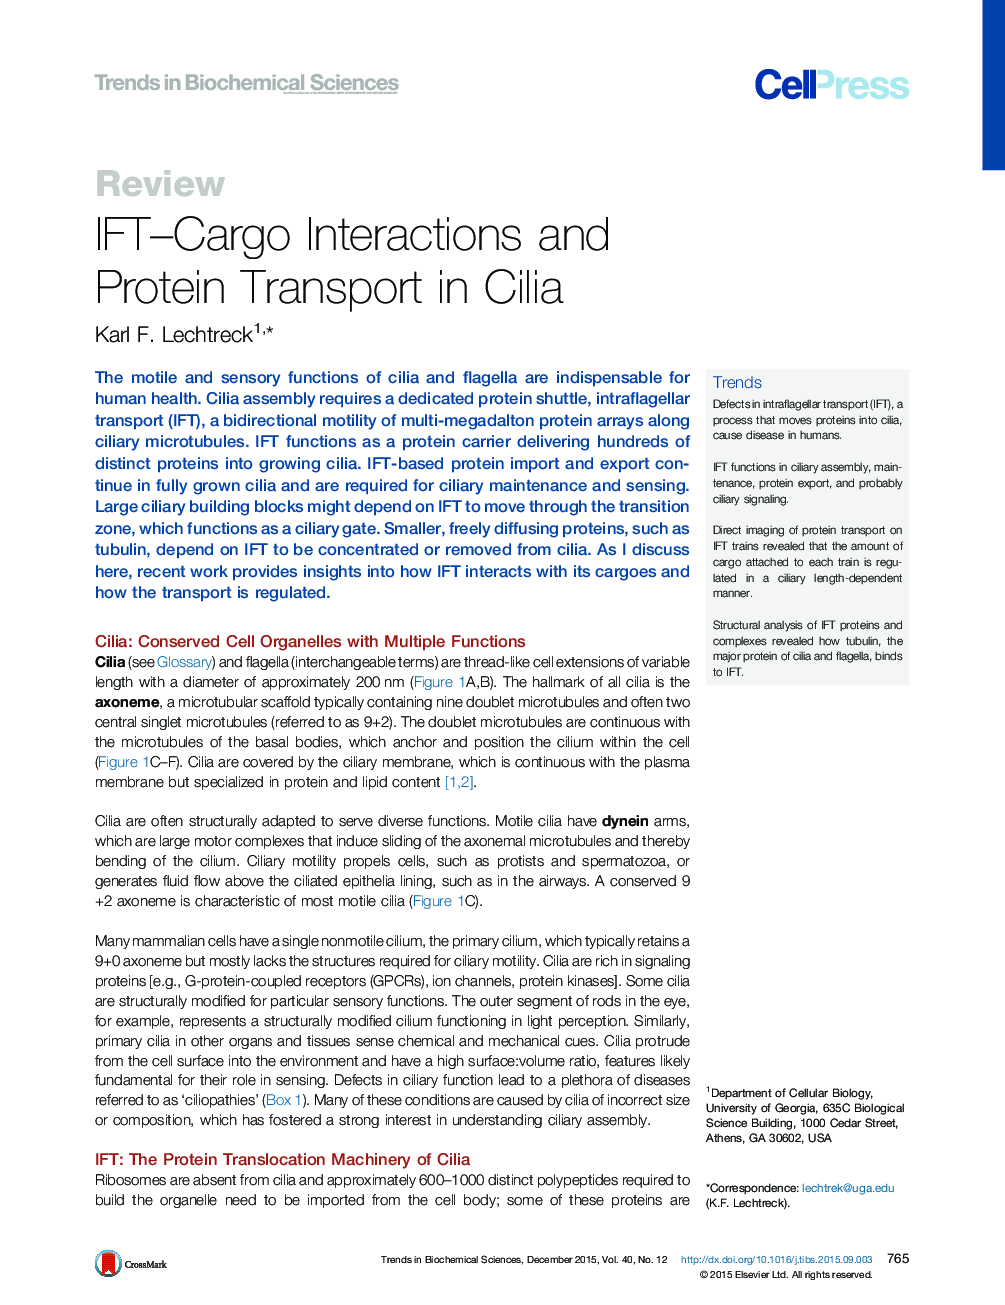 IFT–Cargo Interactions and Protein Transport in Cilia